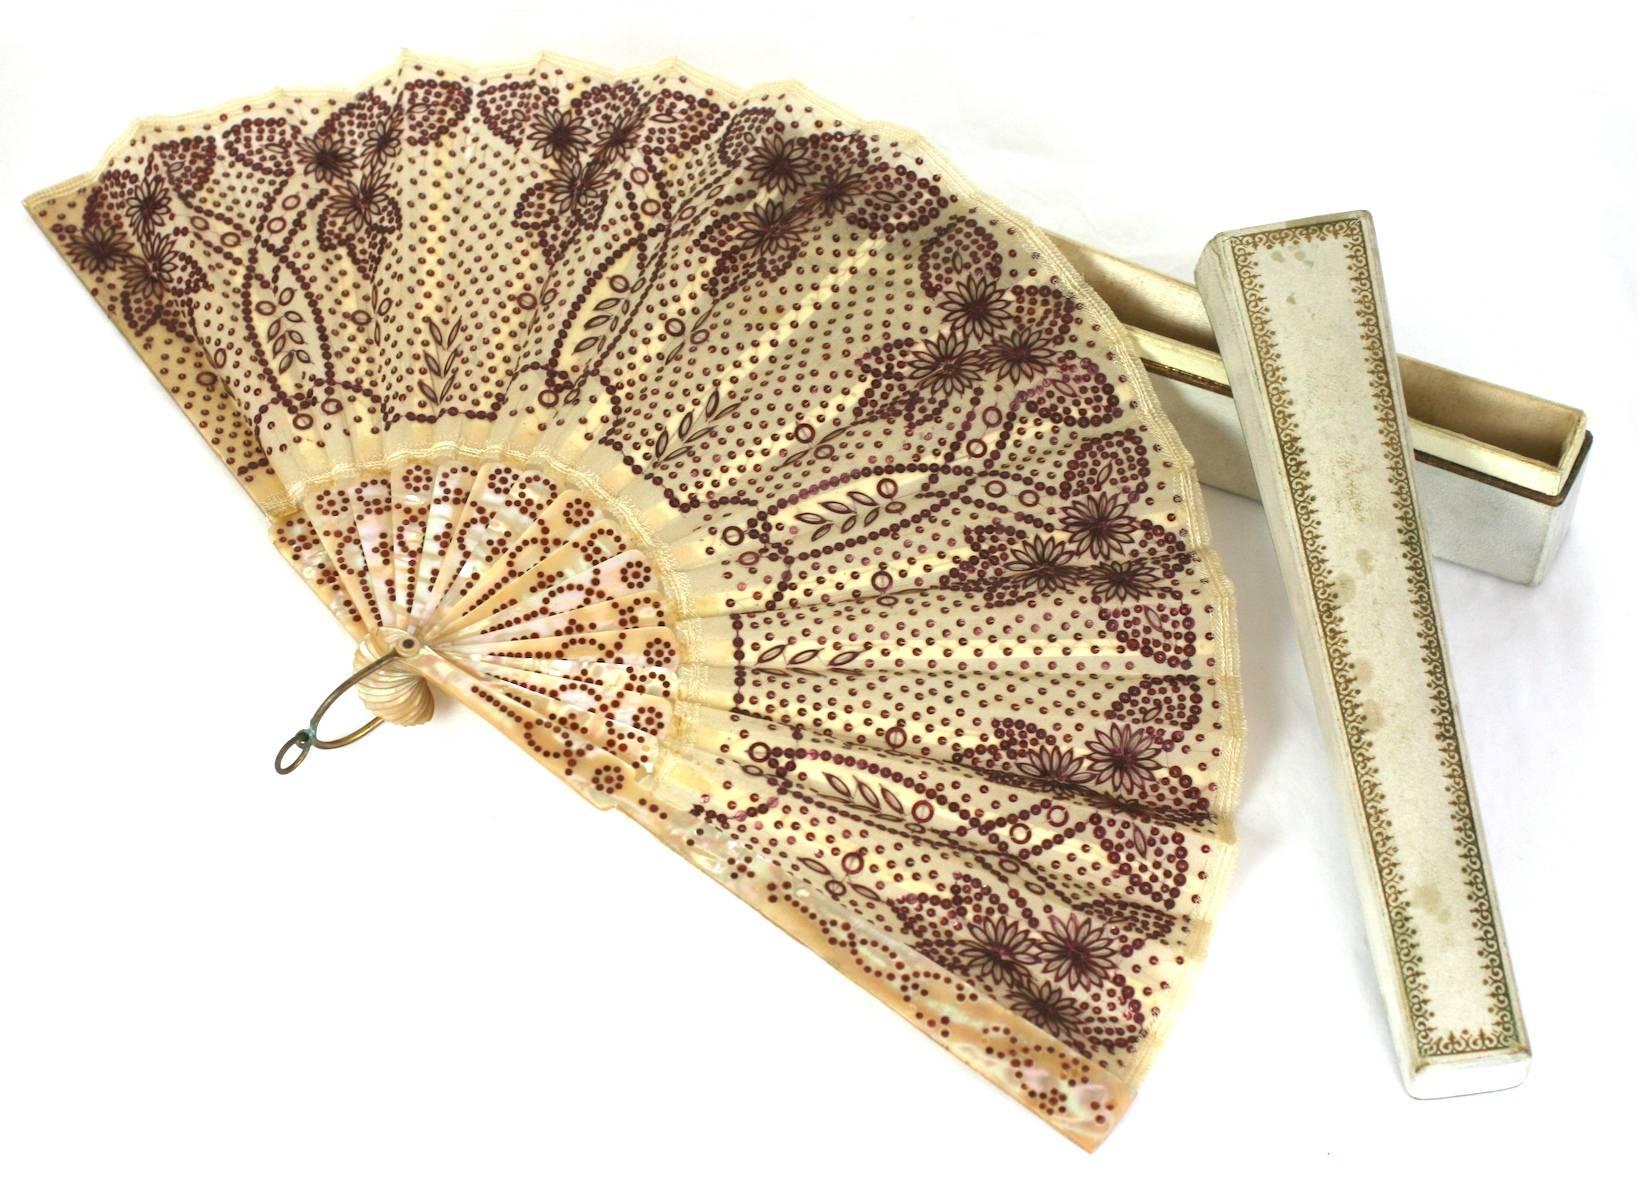 Charming Victorian Sequined fan with beautifully colored rasberry gelatin sequins. Incredibly ornate flower and leaf pattern on a sequin dot base, completely hand embroidered. Inlaid and dyed dots inserted on mother of pearl with bone stays. French